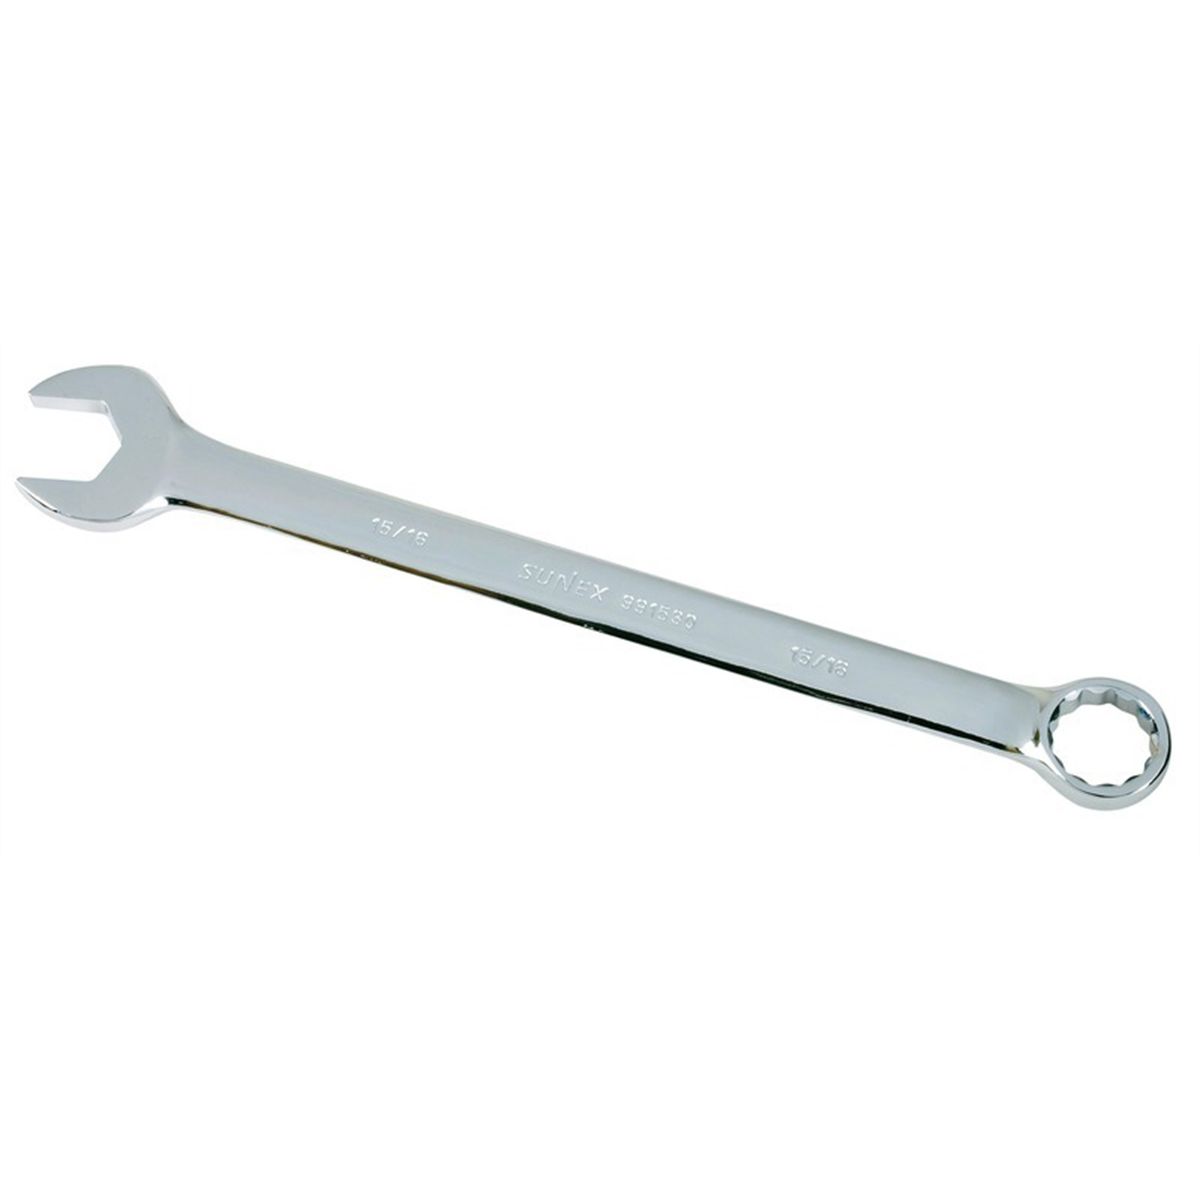 Full Polished-Long Pattern Wrench 15/16 Inch